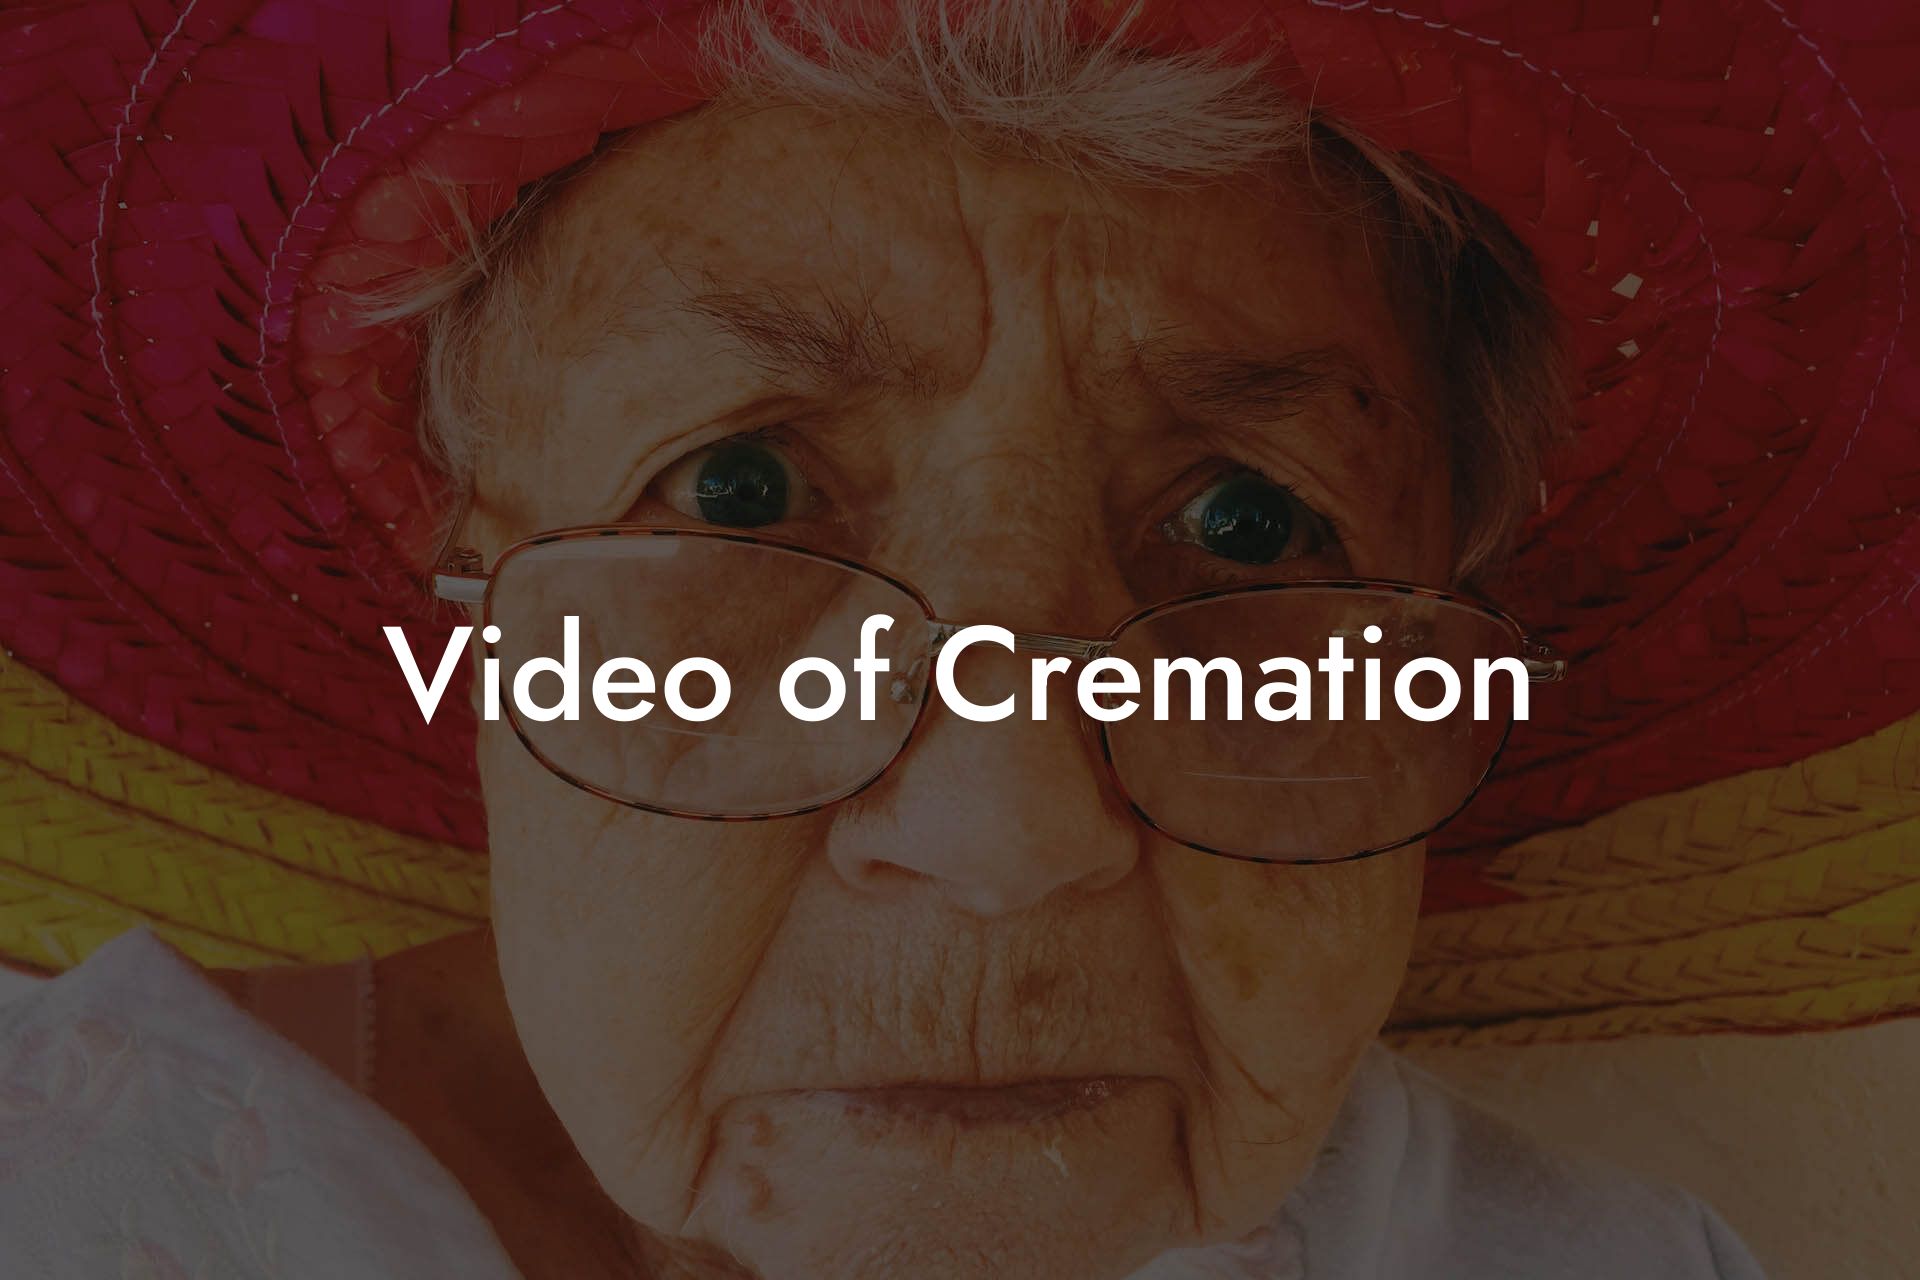 Video of Cremation